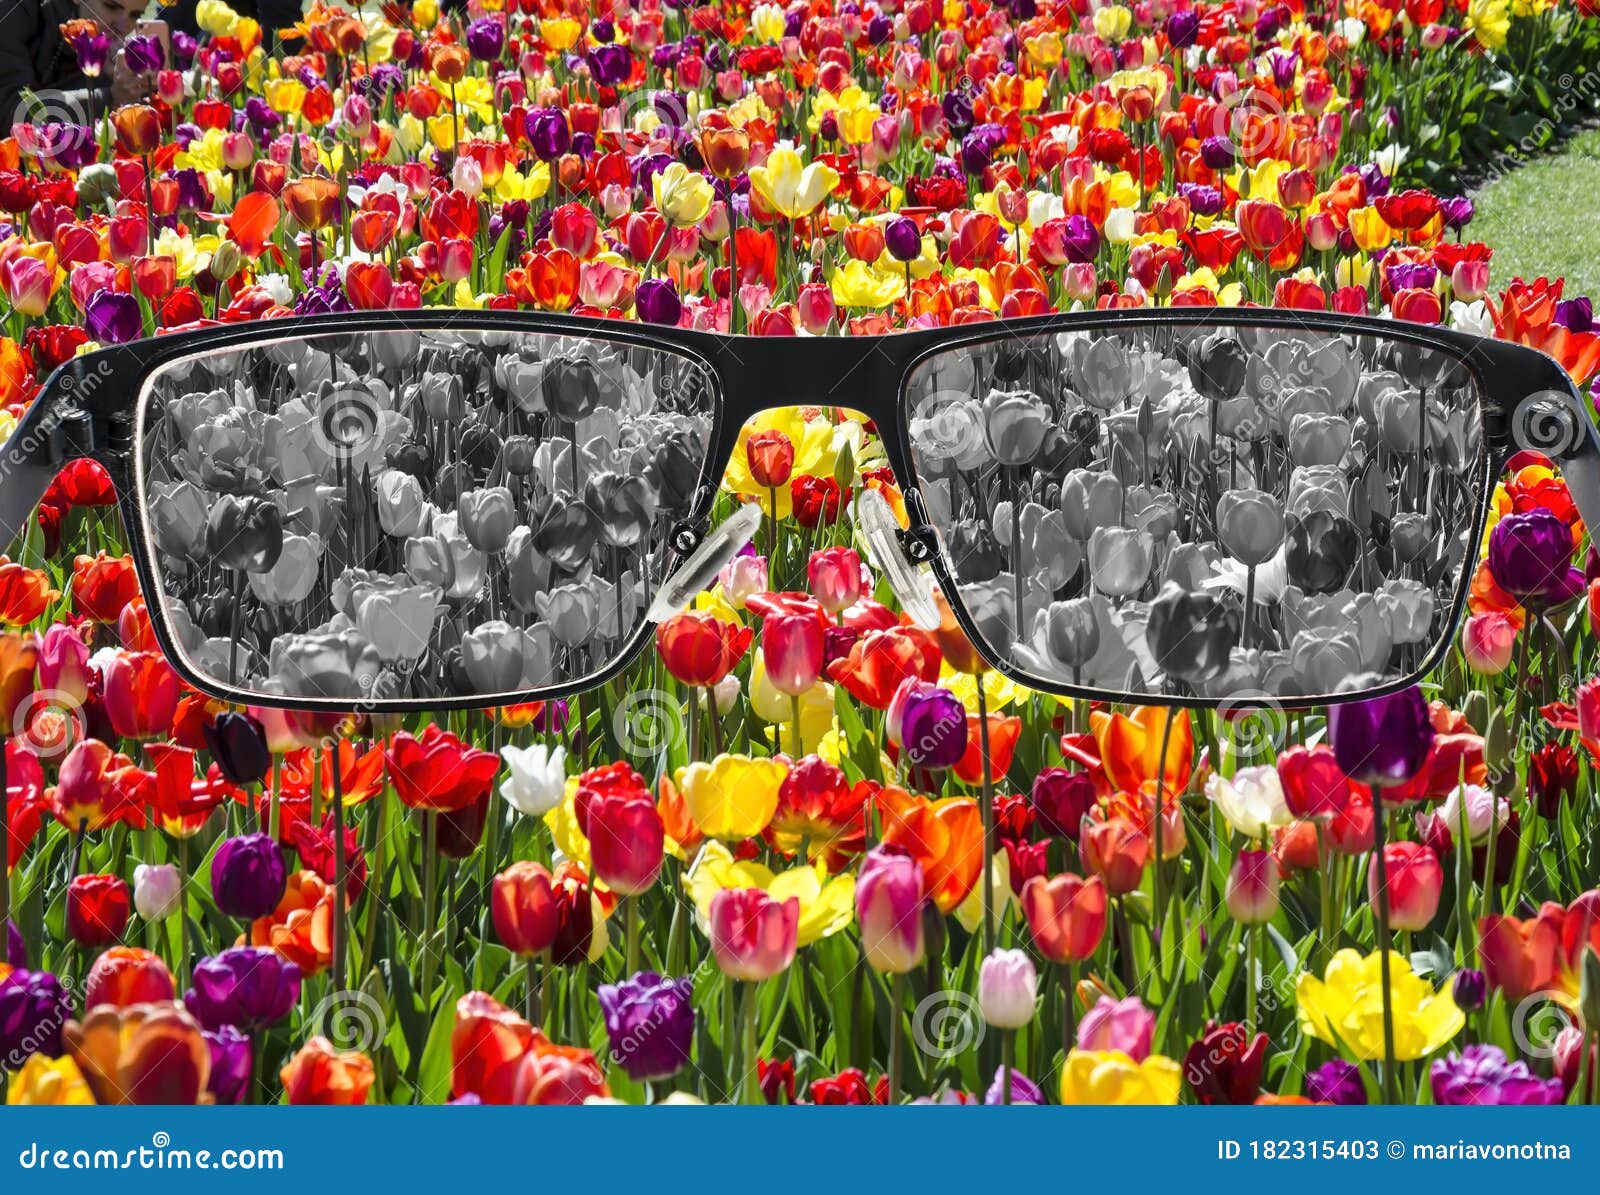 looking through glasses to bleach tulips field. color blindness. world perception during depression. medical condition. health and